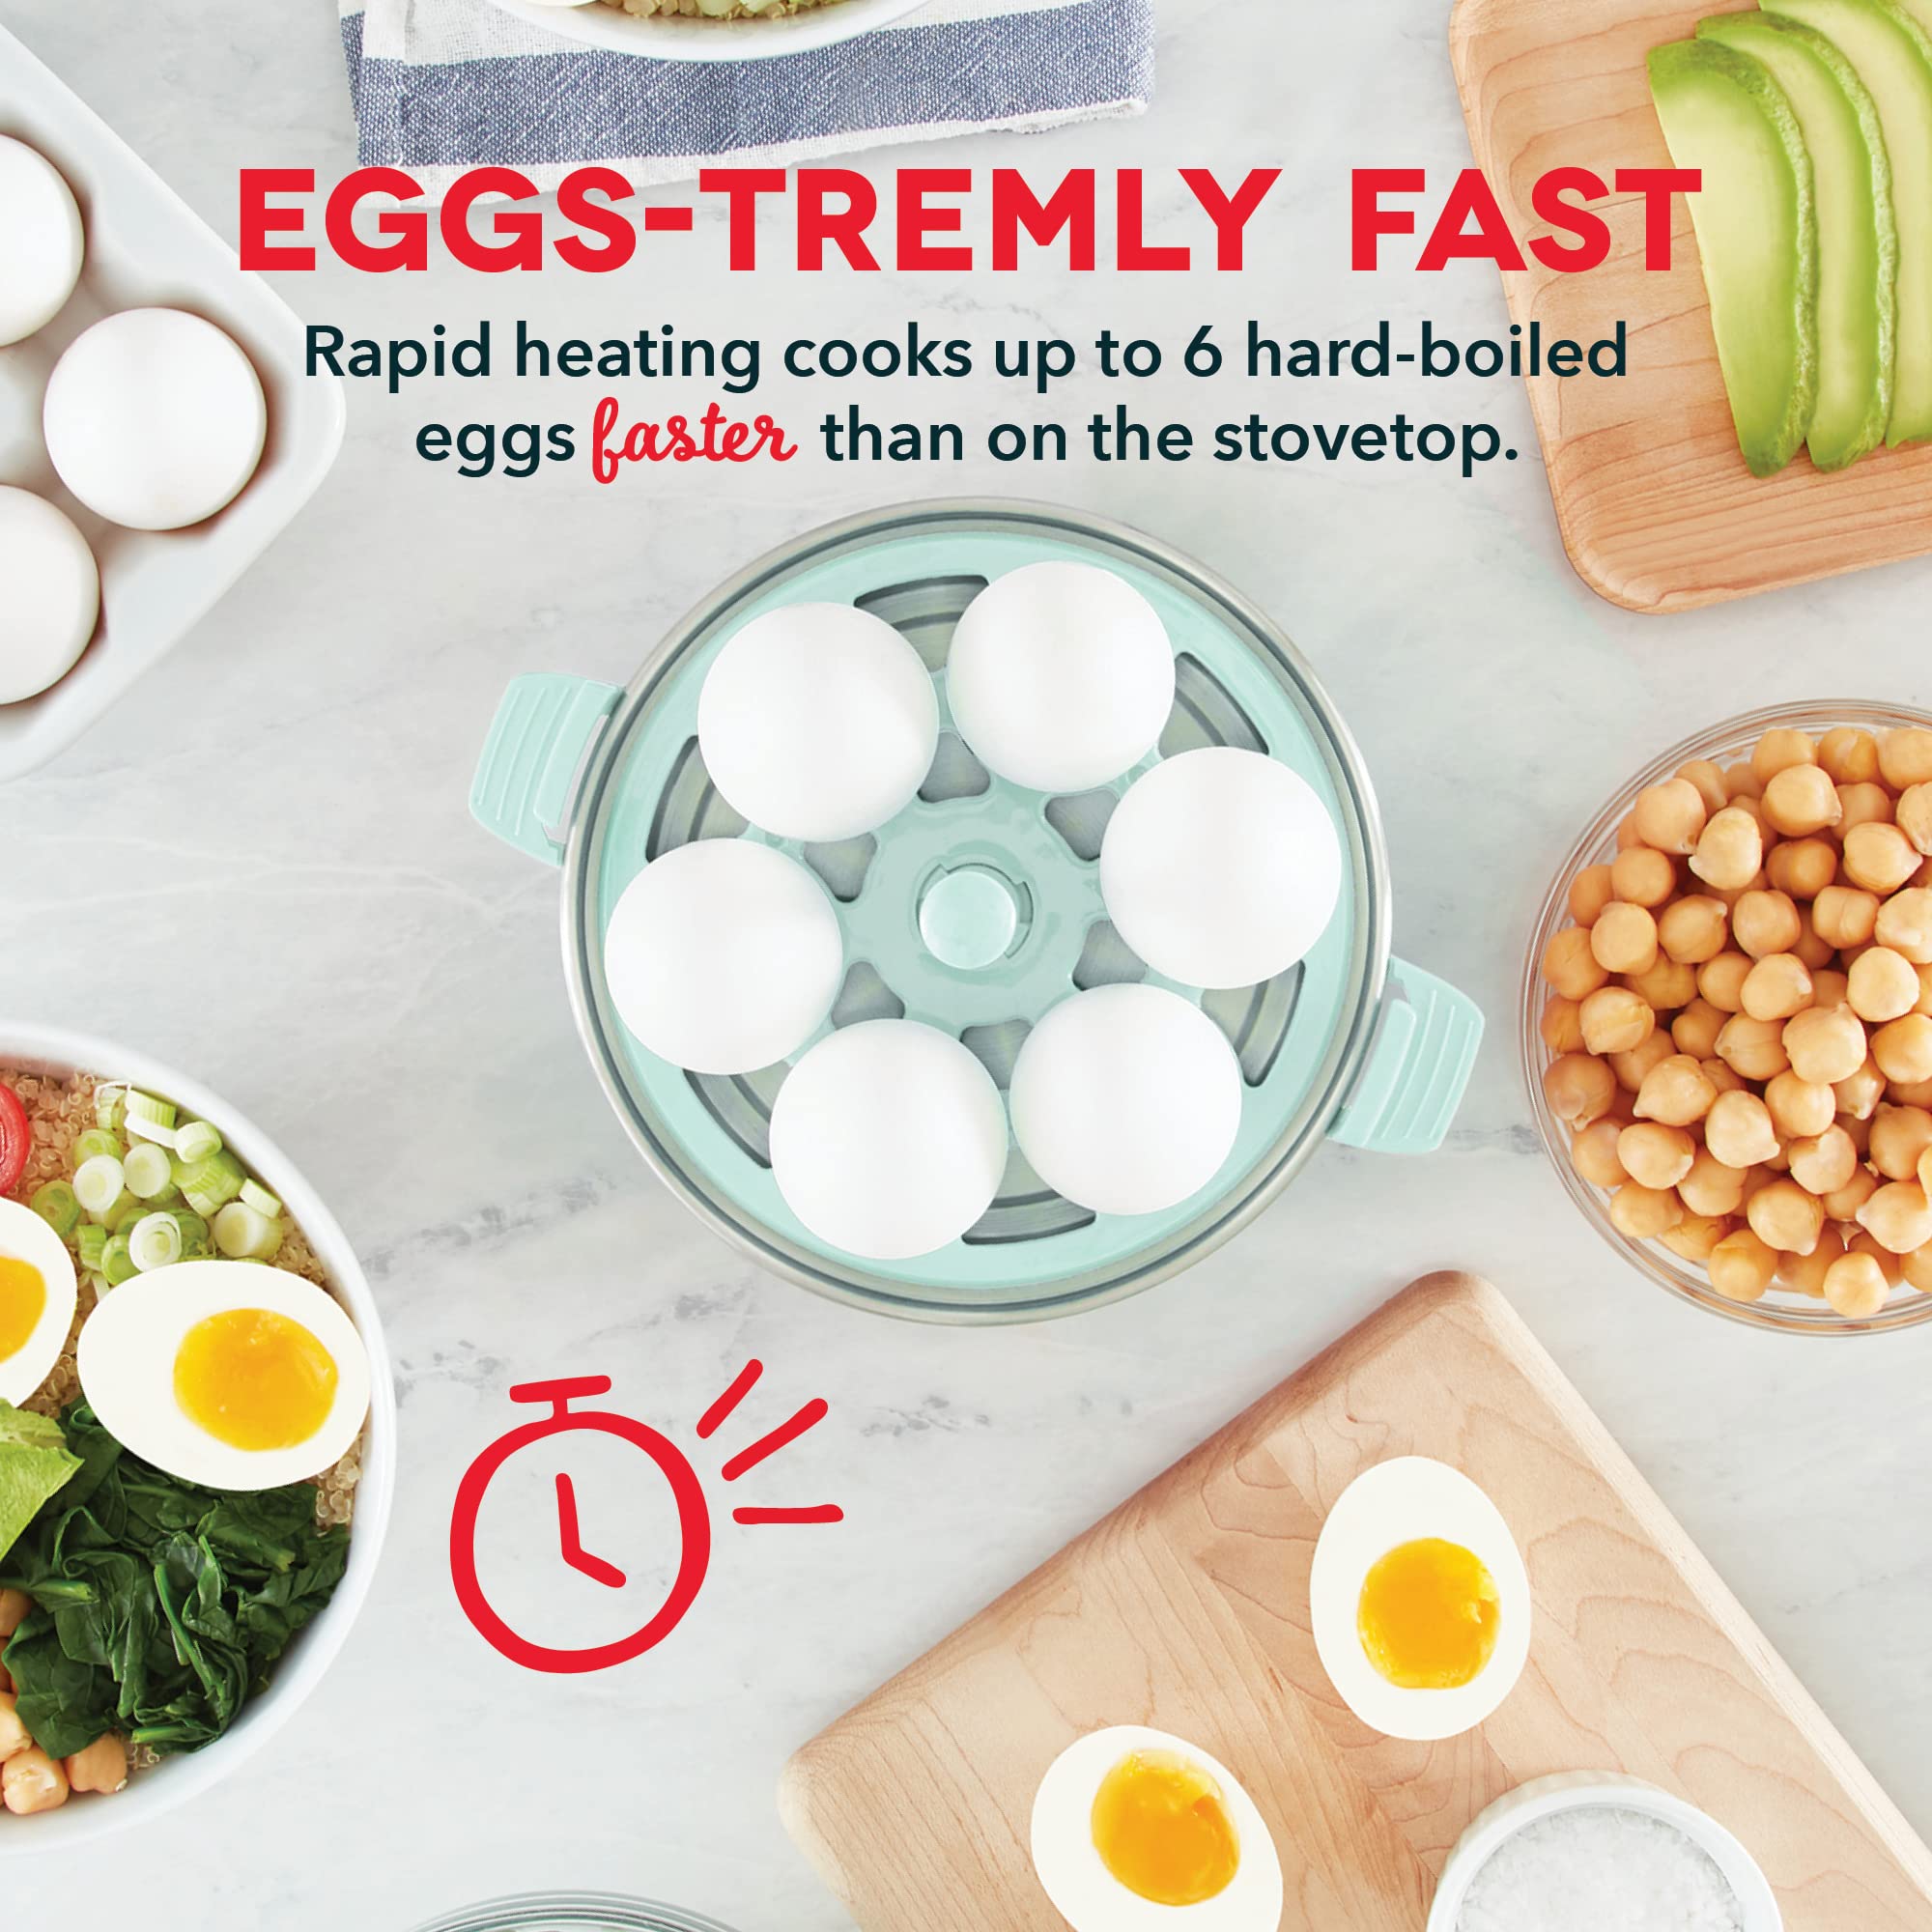 Dash Rapid Egg Cooker: 6 Egg Capacity Electric Egg Cooker for Hard Boiled Eggs, Poached Eggs, Scrambled Eggs, or Omelets with Auto Shut Off Feature, Aqua